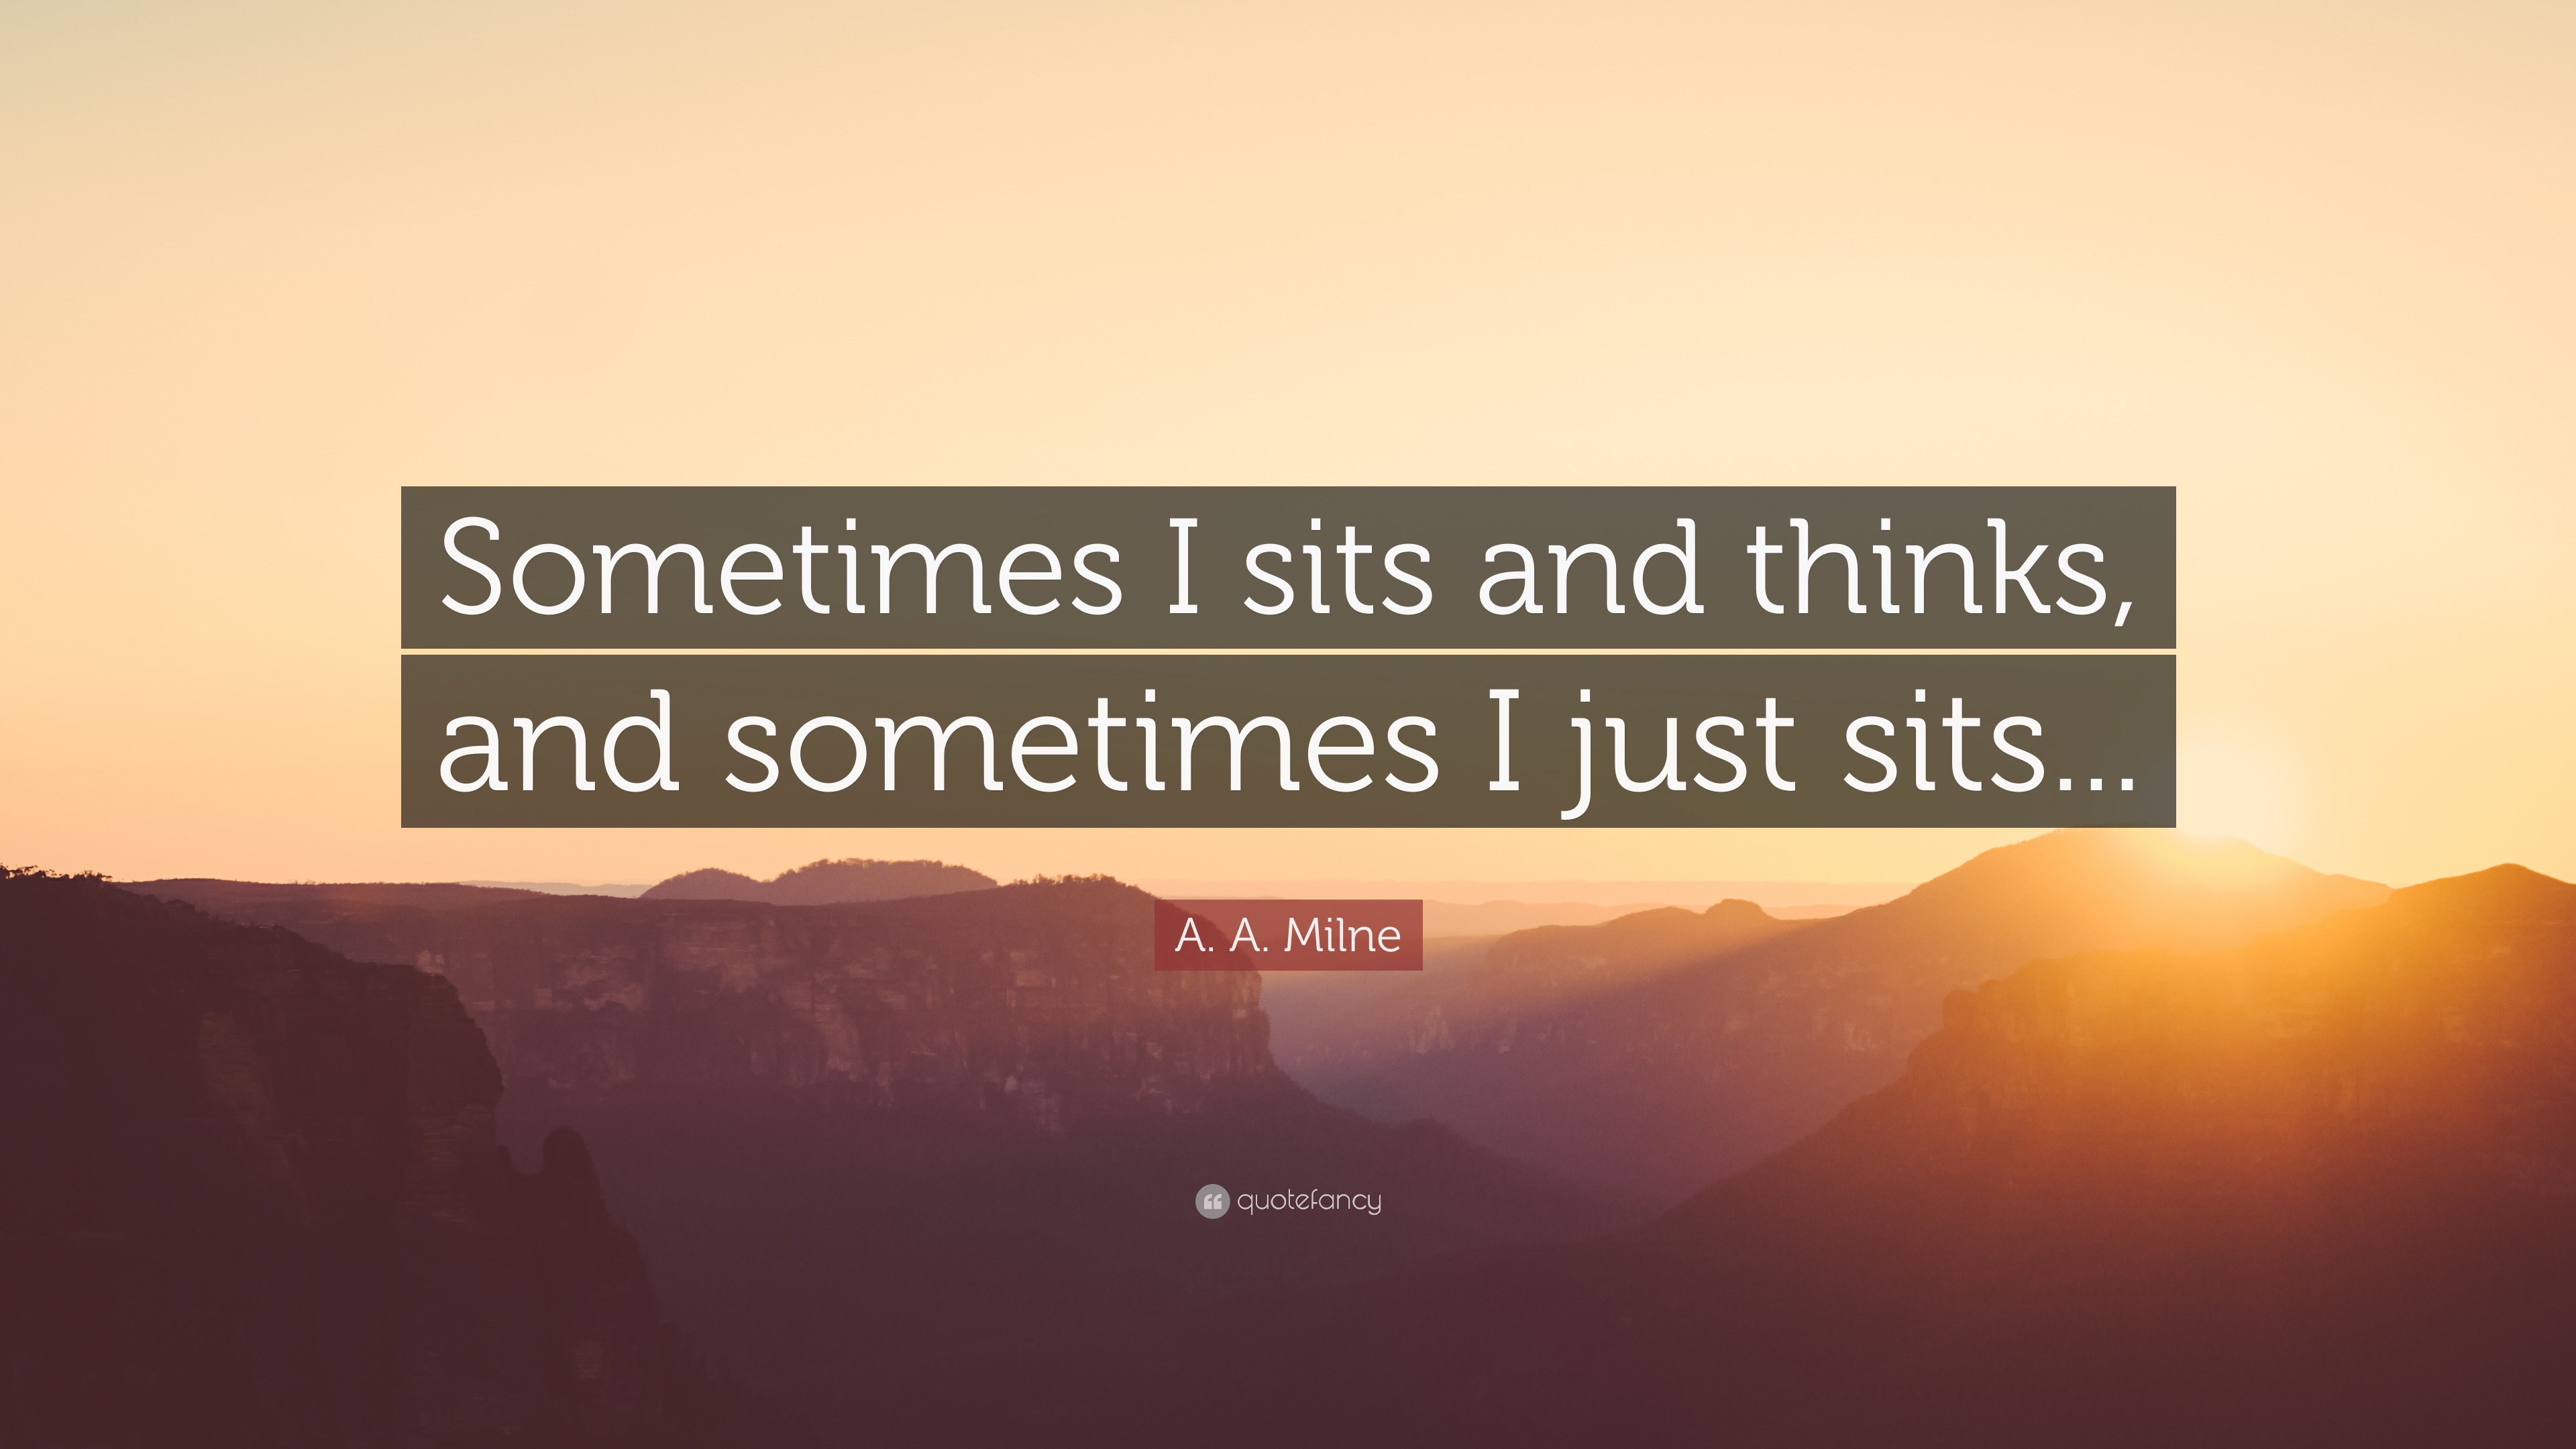 A A Milne Quote “sometimes I Sits And Thinks And Sometimes I Just Sits” 9553